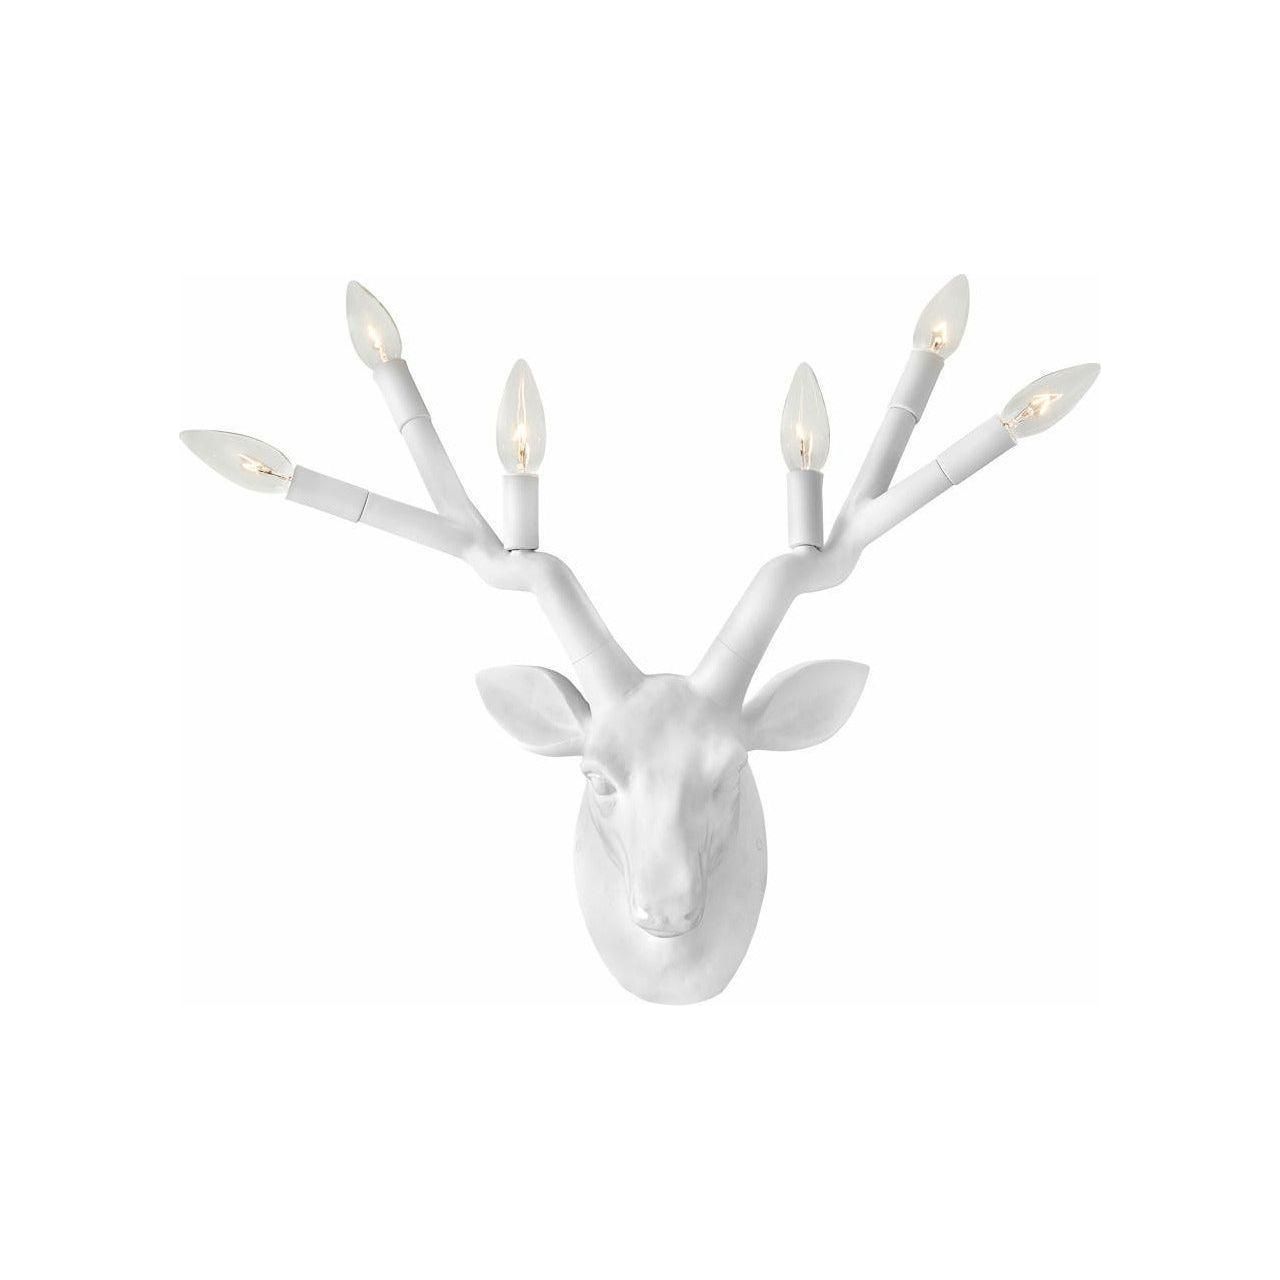 Hinkley - Hinkley Stag Sconce - Lights Canada